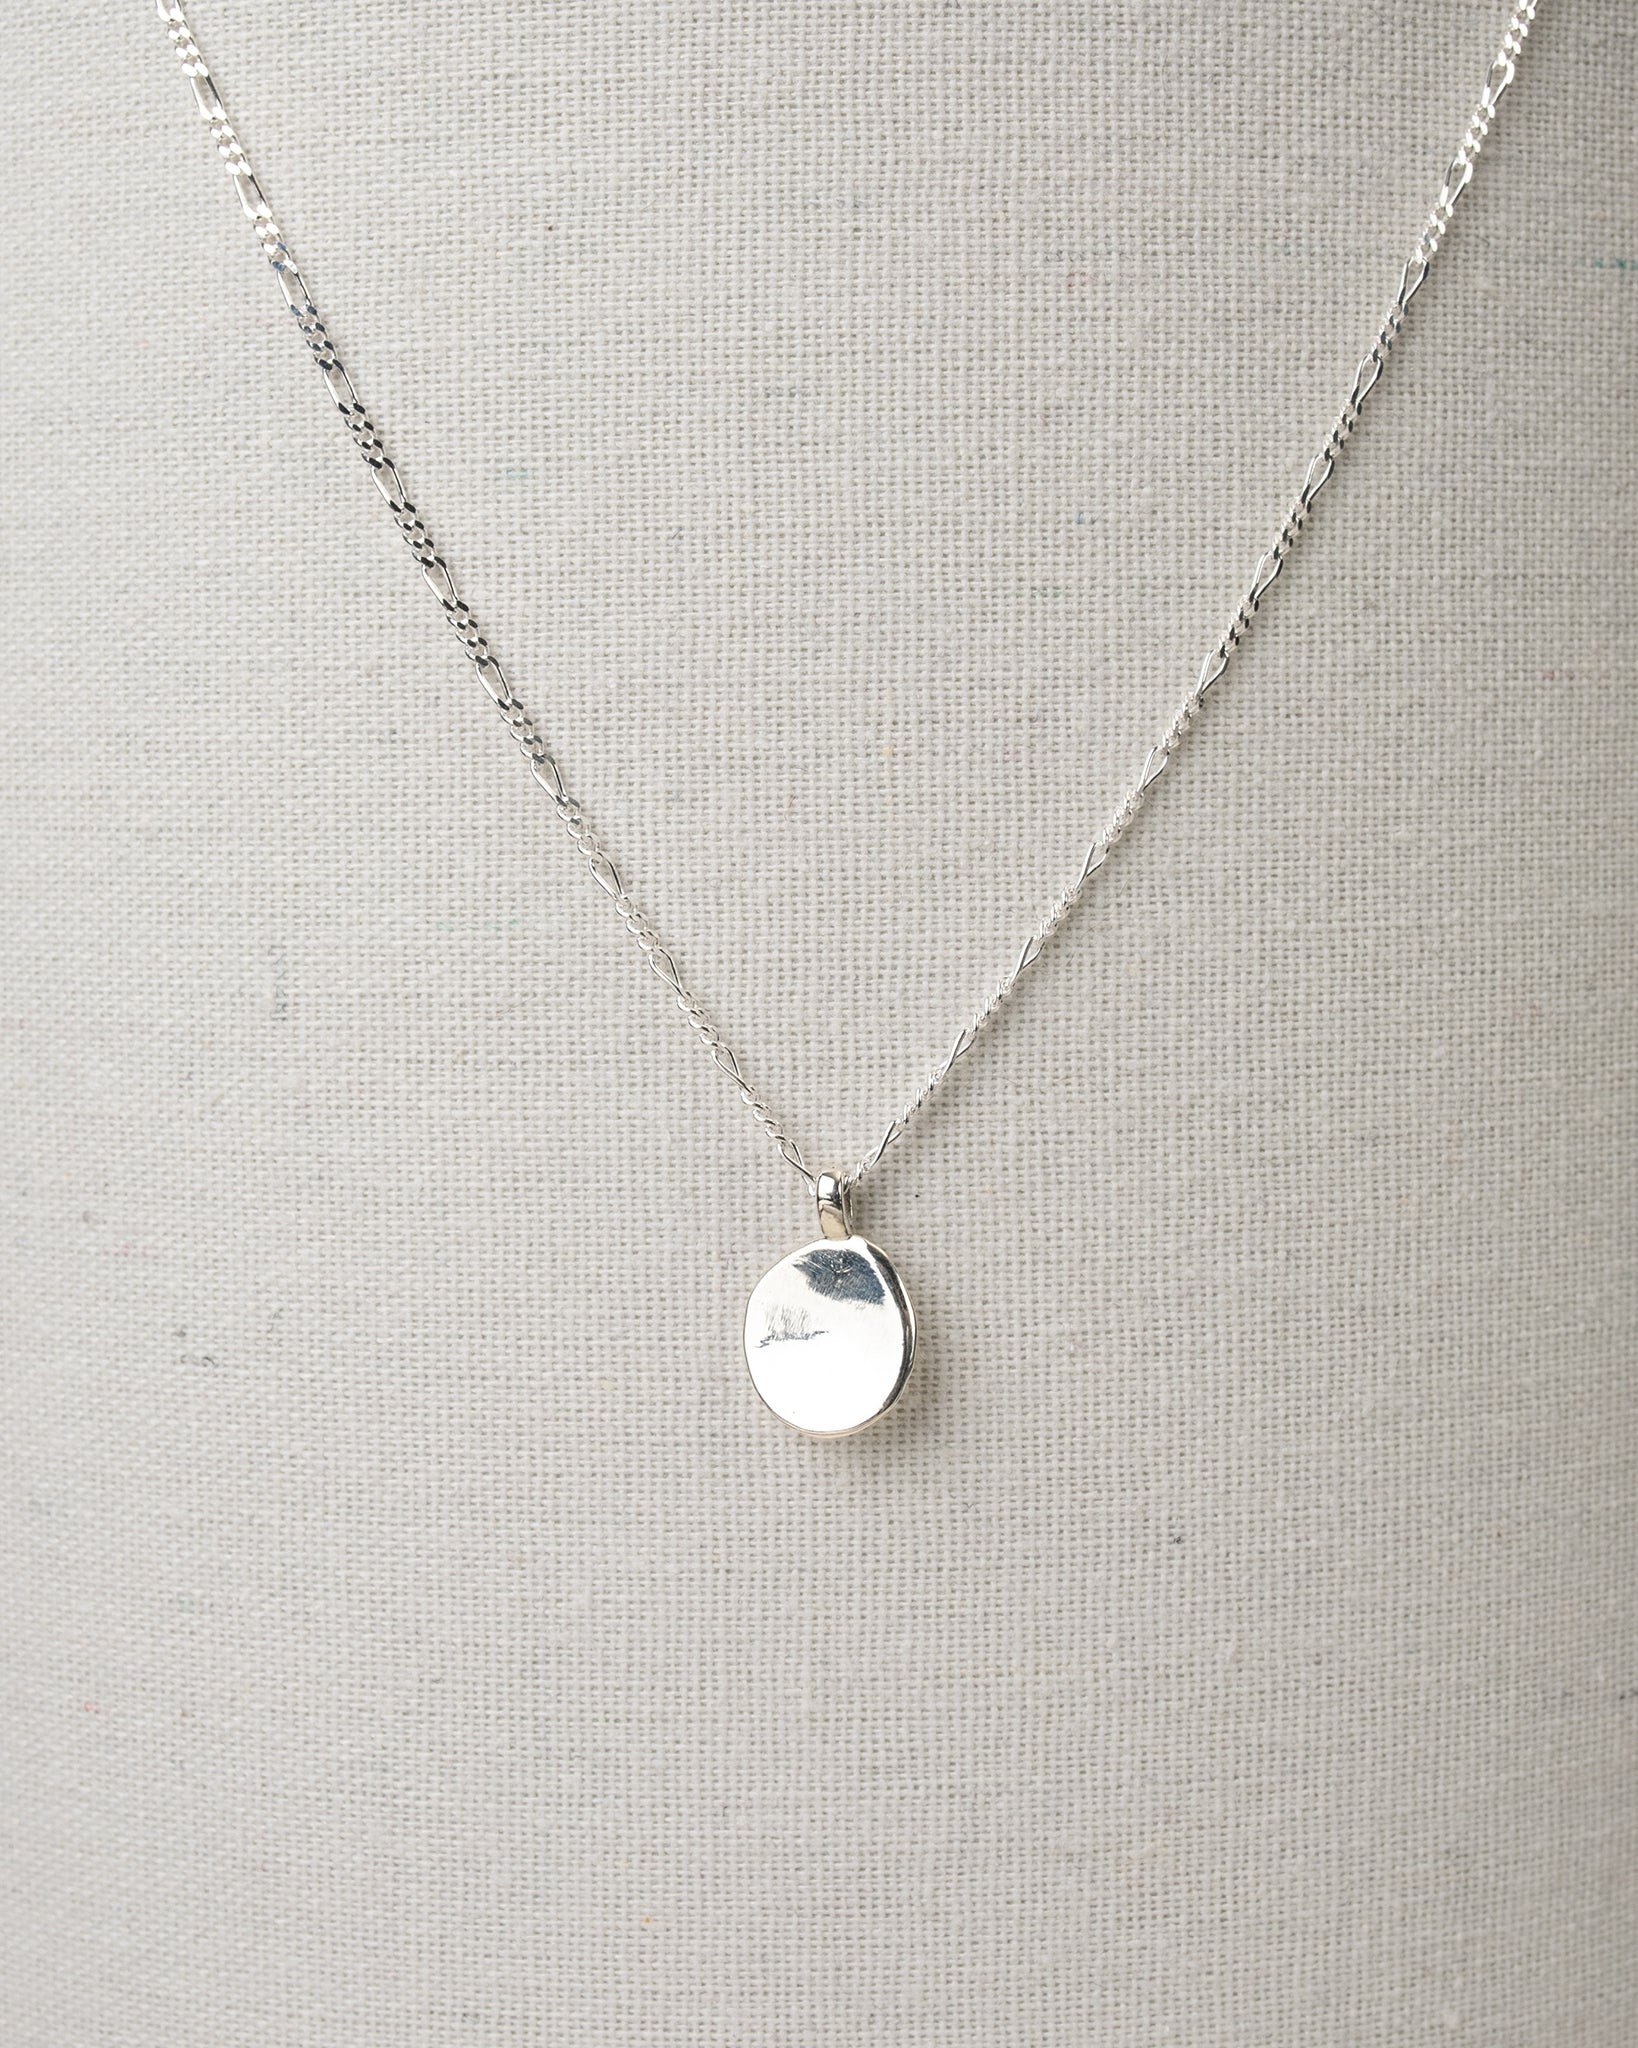 Silver oval pendant necklace hanging on canvas